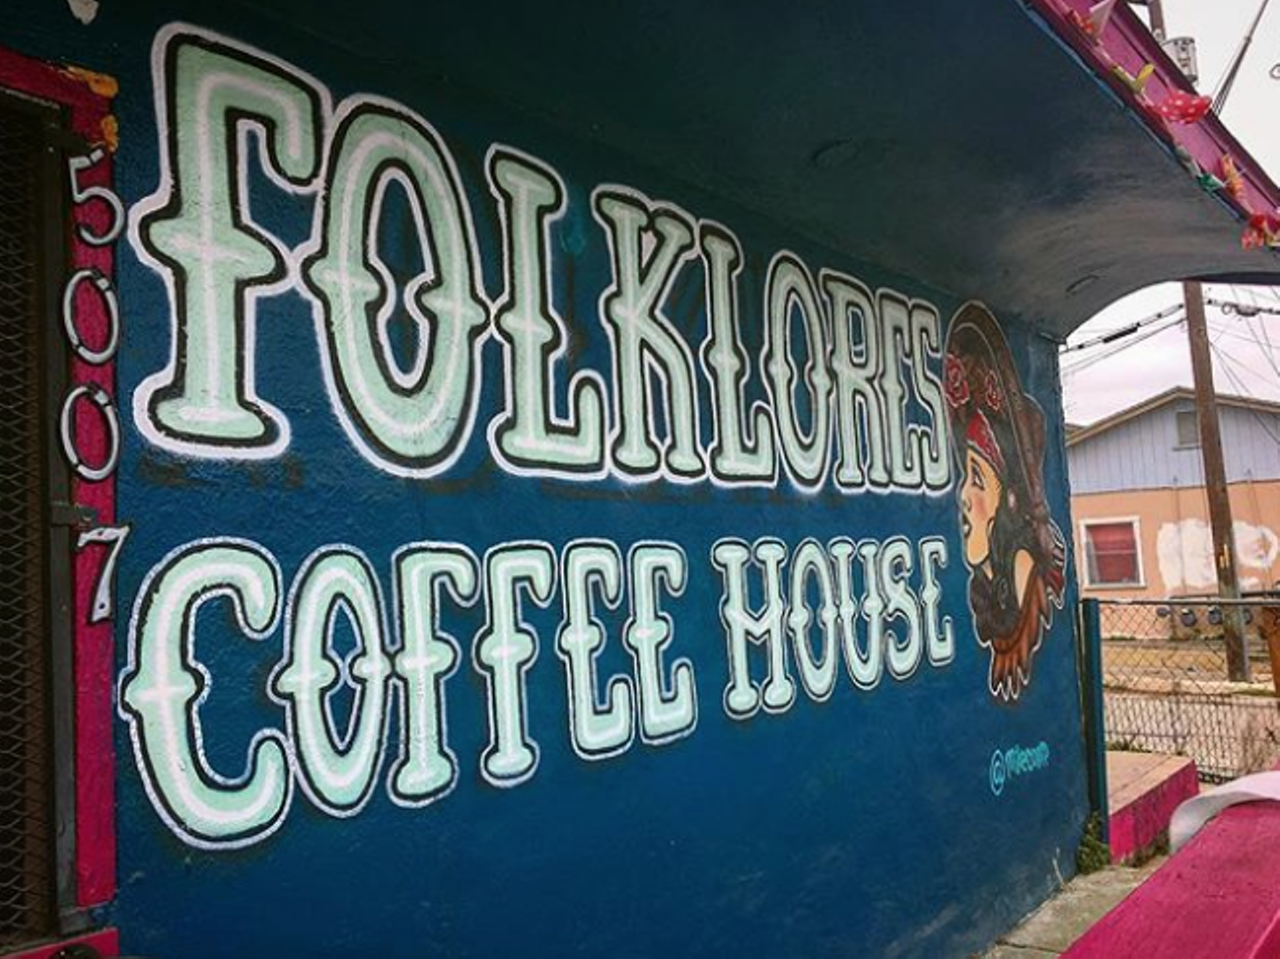 Folklores Coffee House
5009 S Flores St, (210) 455-7829, folklores-coffee-house.business.site
Photo via Instagram / chachaluxedevil